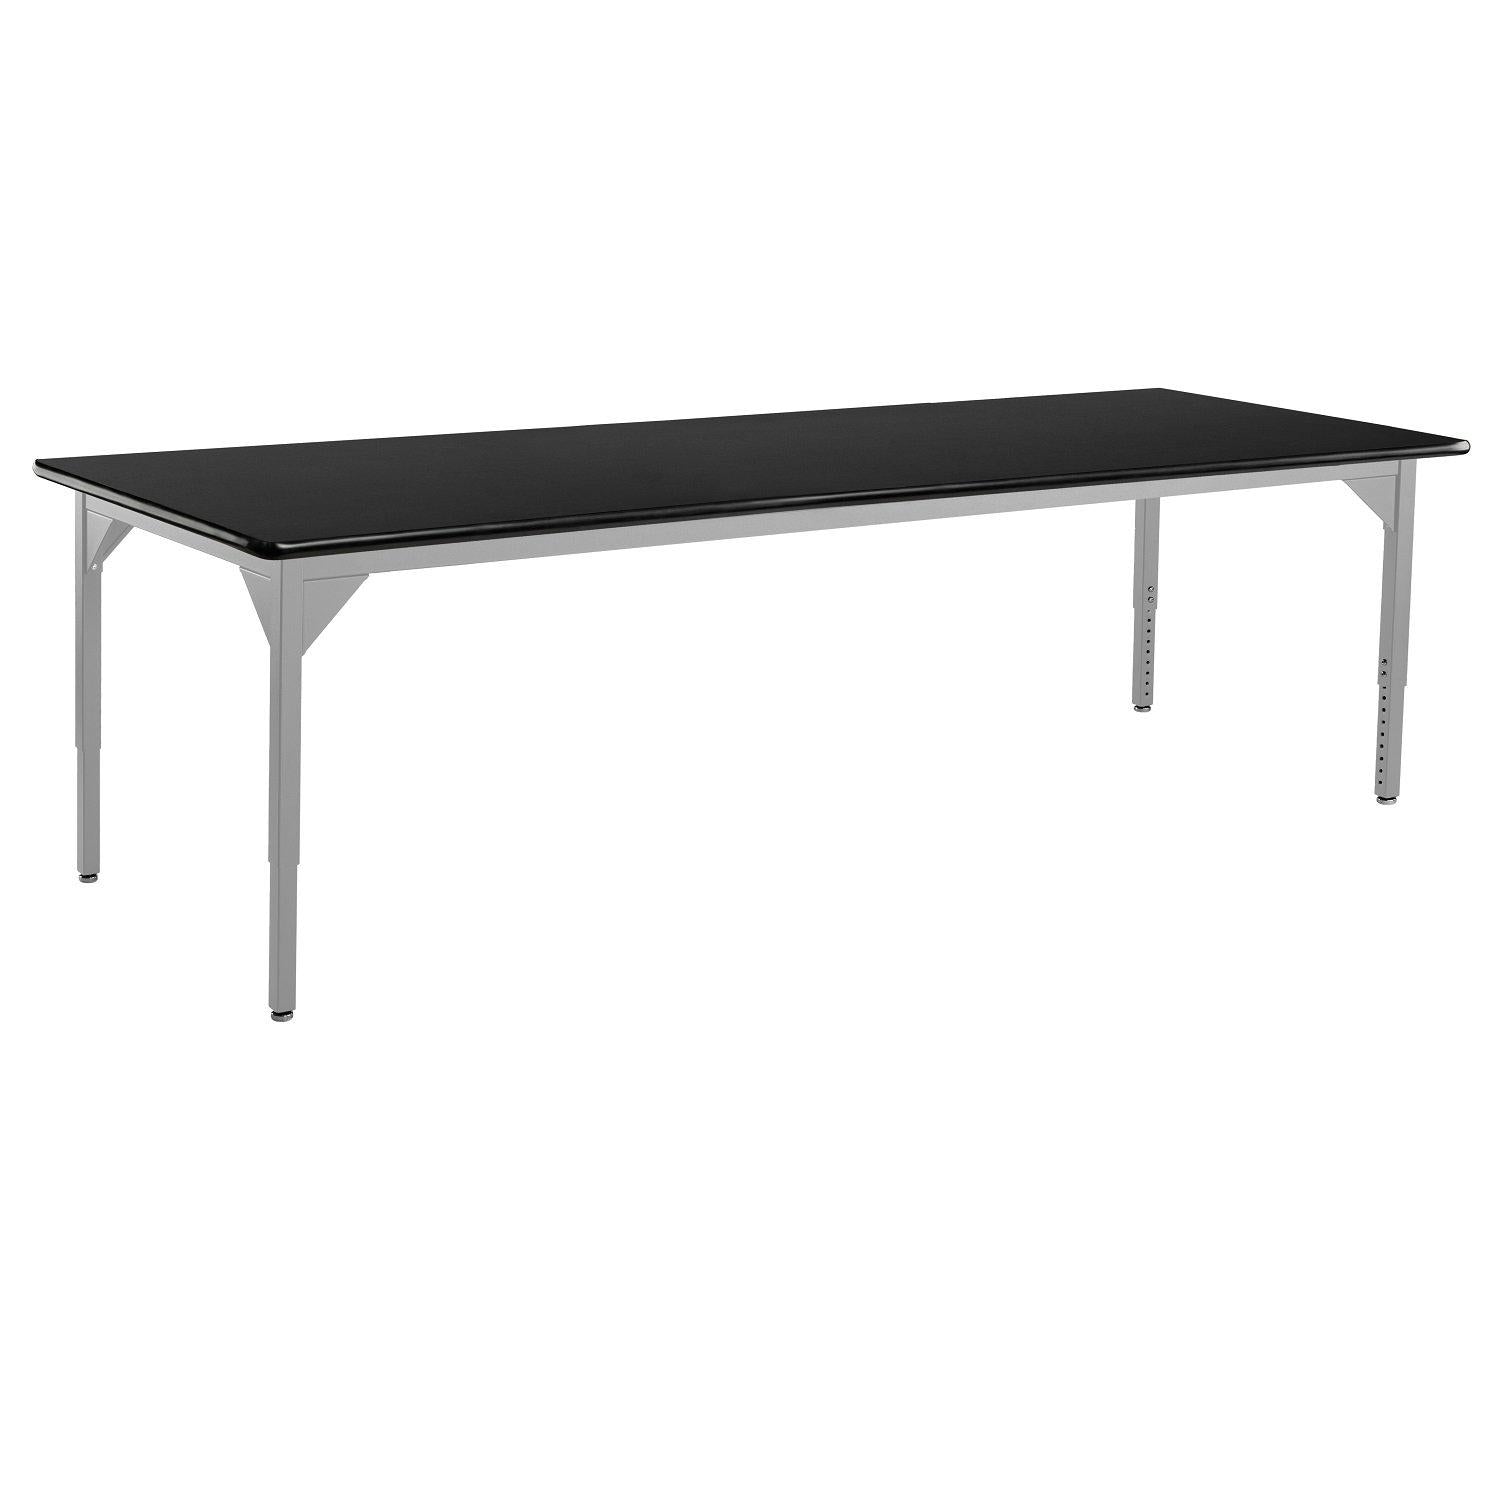 Heavy-Duty Height-Adjustable Utility Table, Soft Grey Frame, 48" x 72", High-Pressure Laminate Top with T-Mold Edge